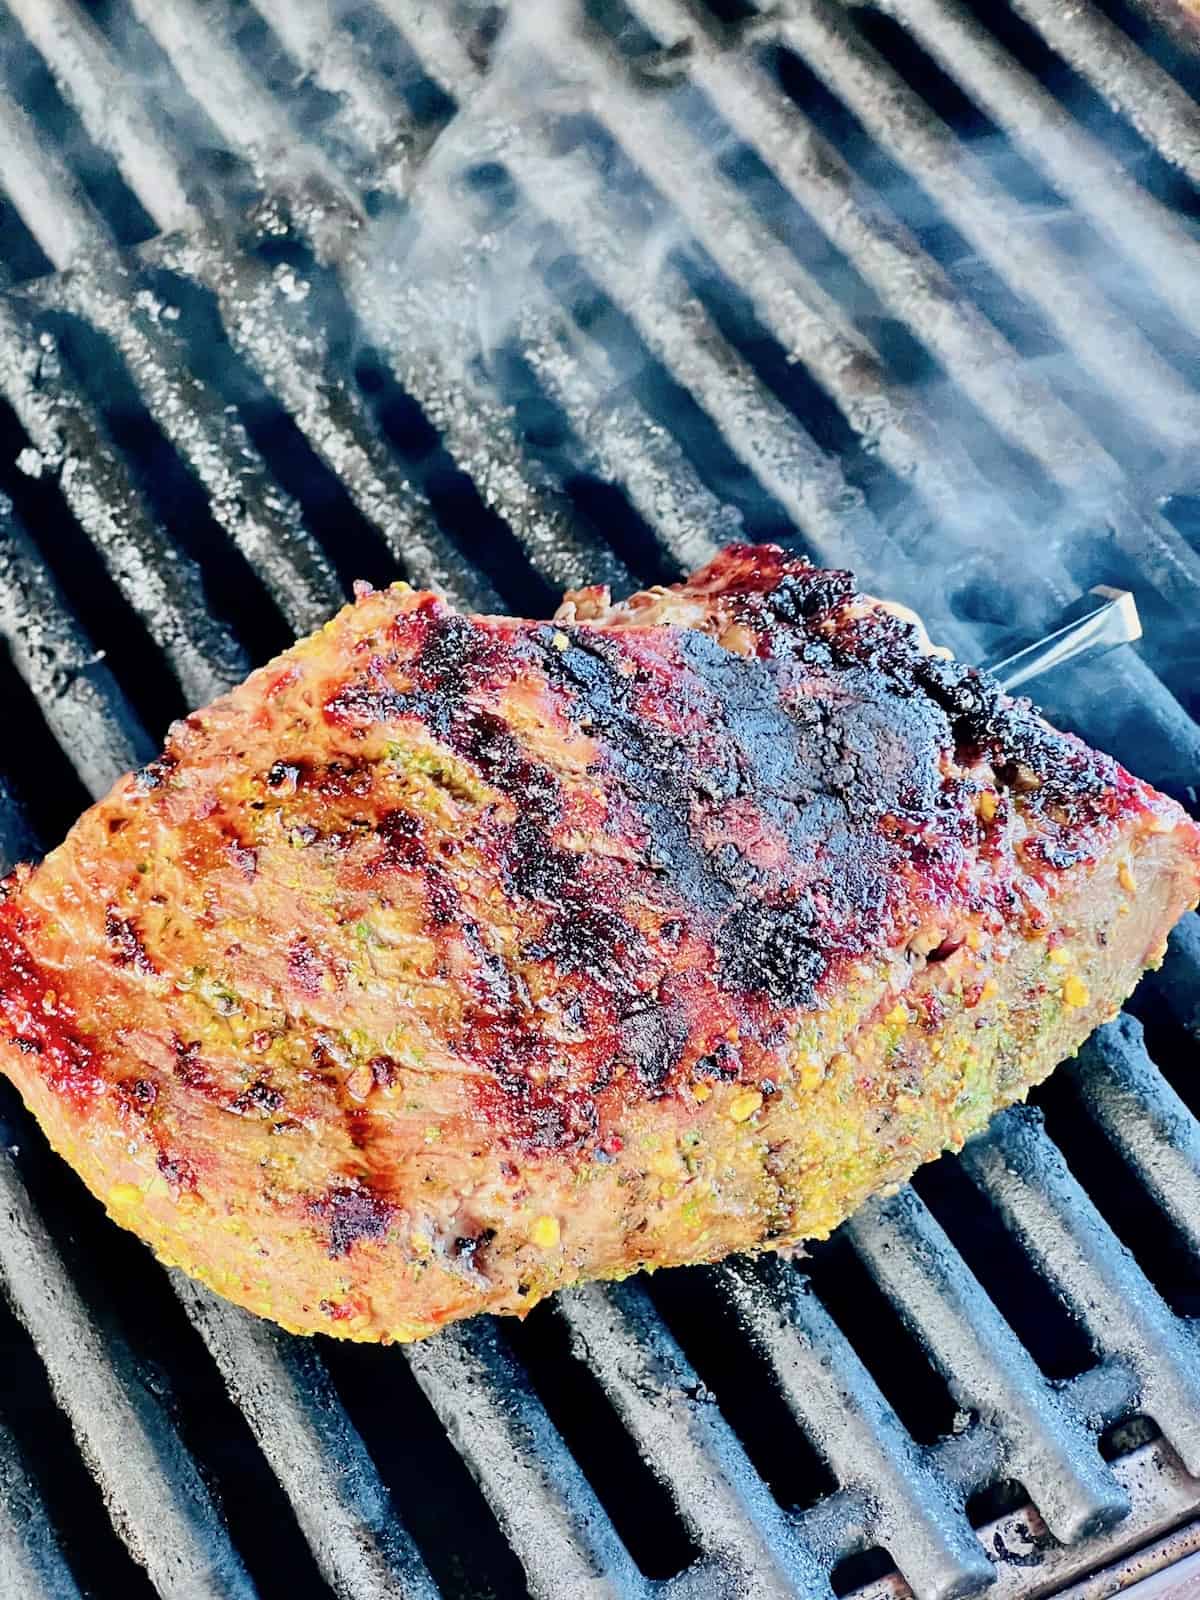 Tri-Tip On the grates of a gas grill with a dark crust & grill marks.